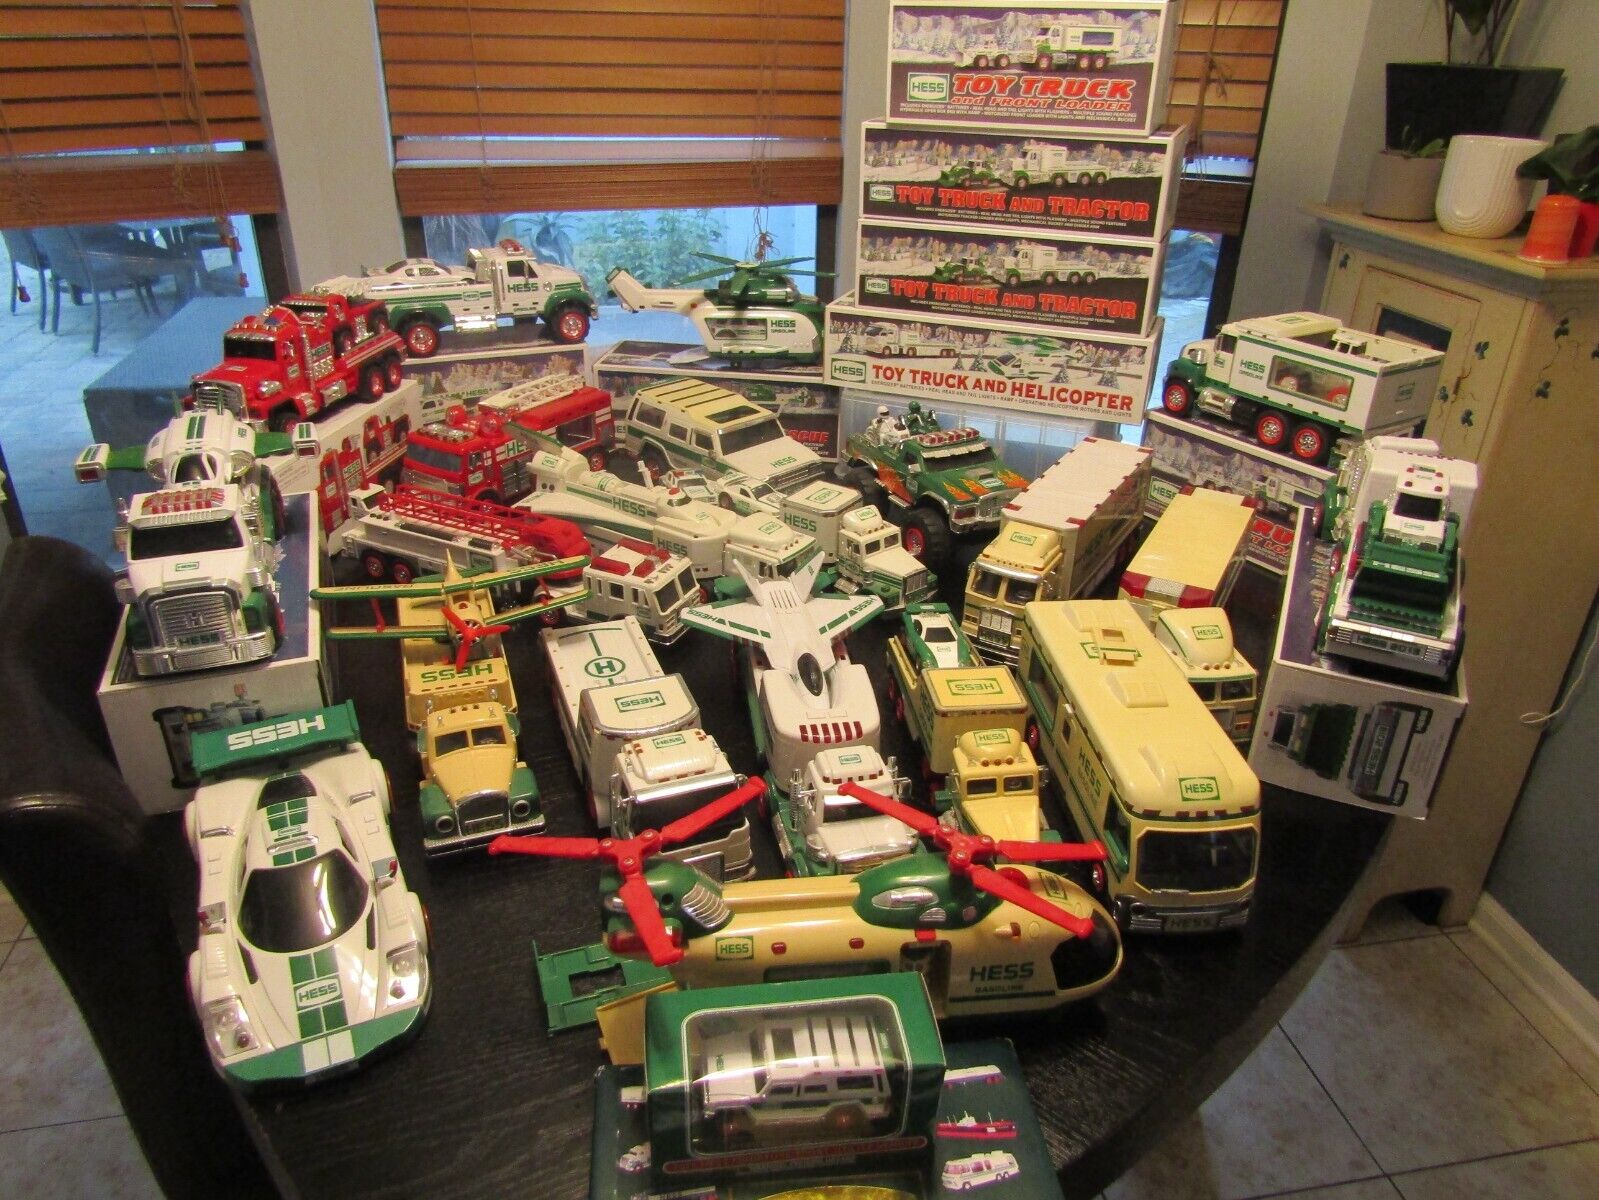 29+++ MASSIVE COLLECTION OF HESS TRUCKS & VEHICLES, YOU GET ALL SEE DESCRIPTN